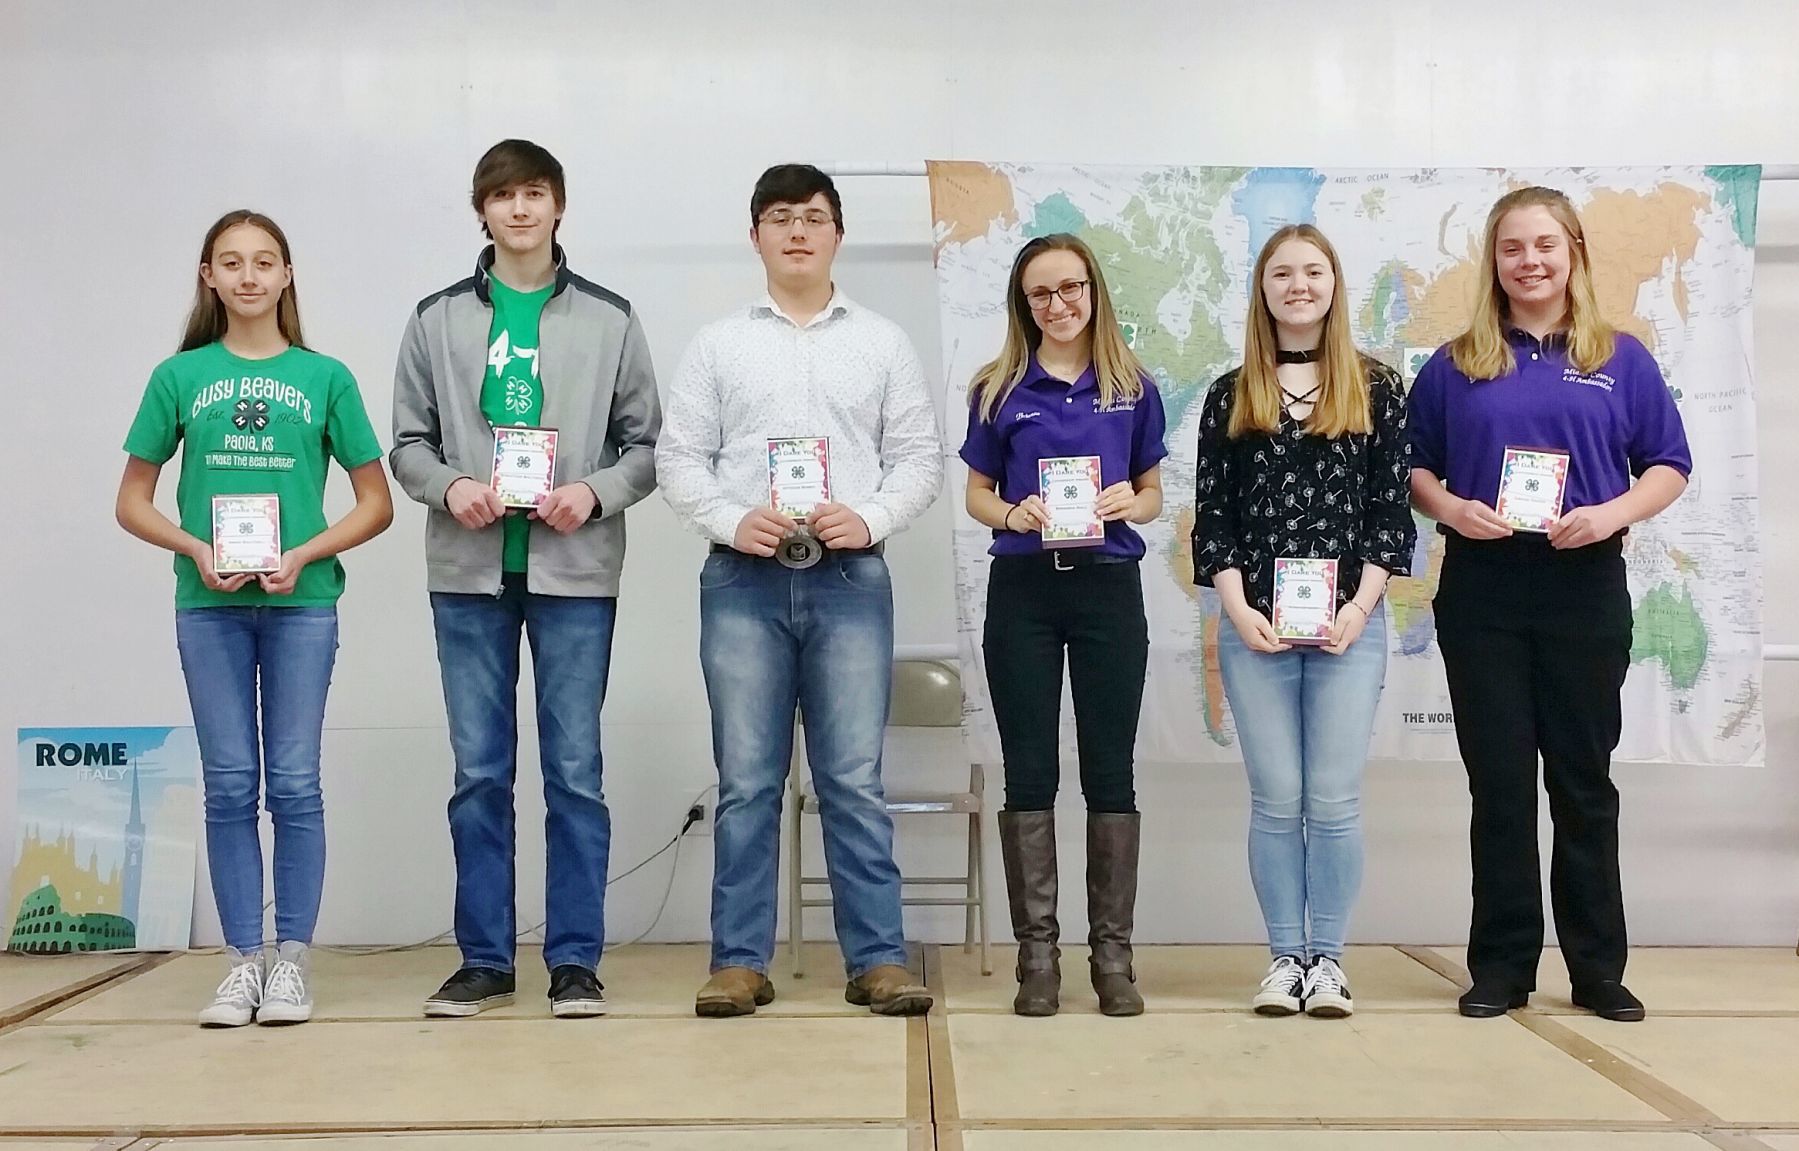 Youths earn awards during 4-H Achievement Celebration Education republic-online photo